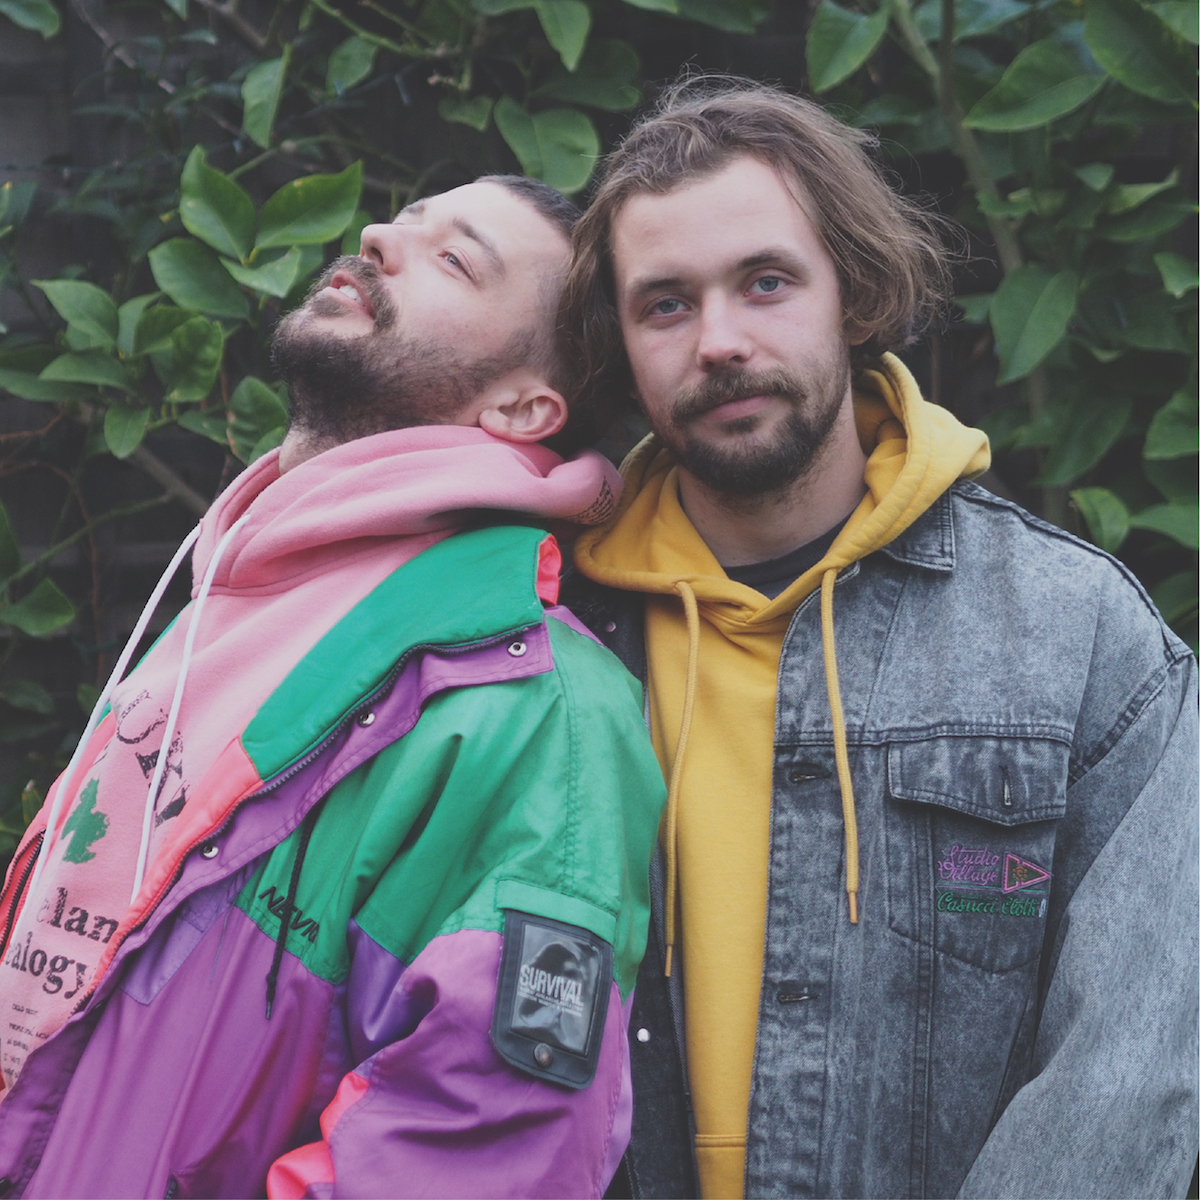 TRAVALLEY DROP RAUCOUS NEW SINGLE AND BONKERS VIDEO ‘DEAR BABE’